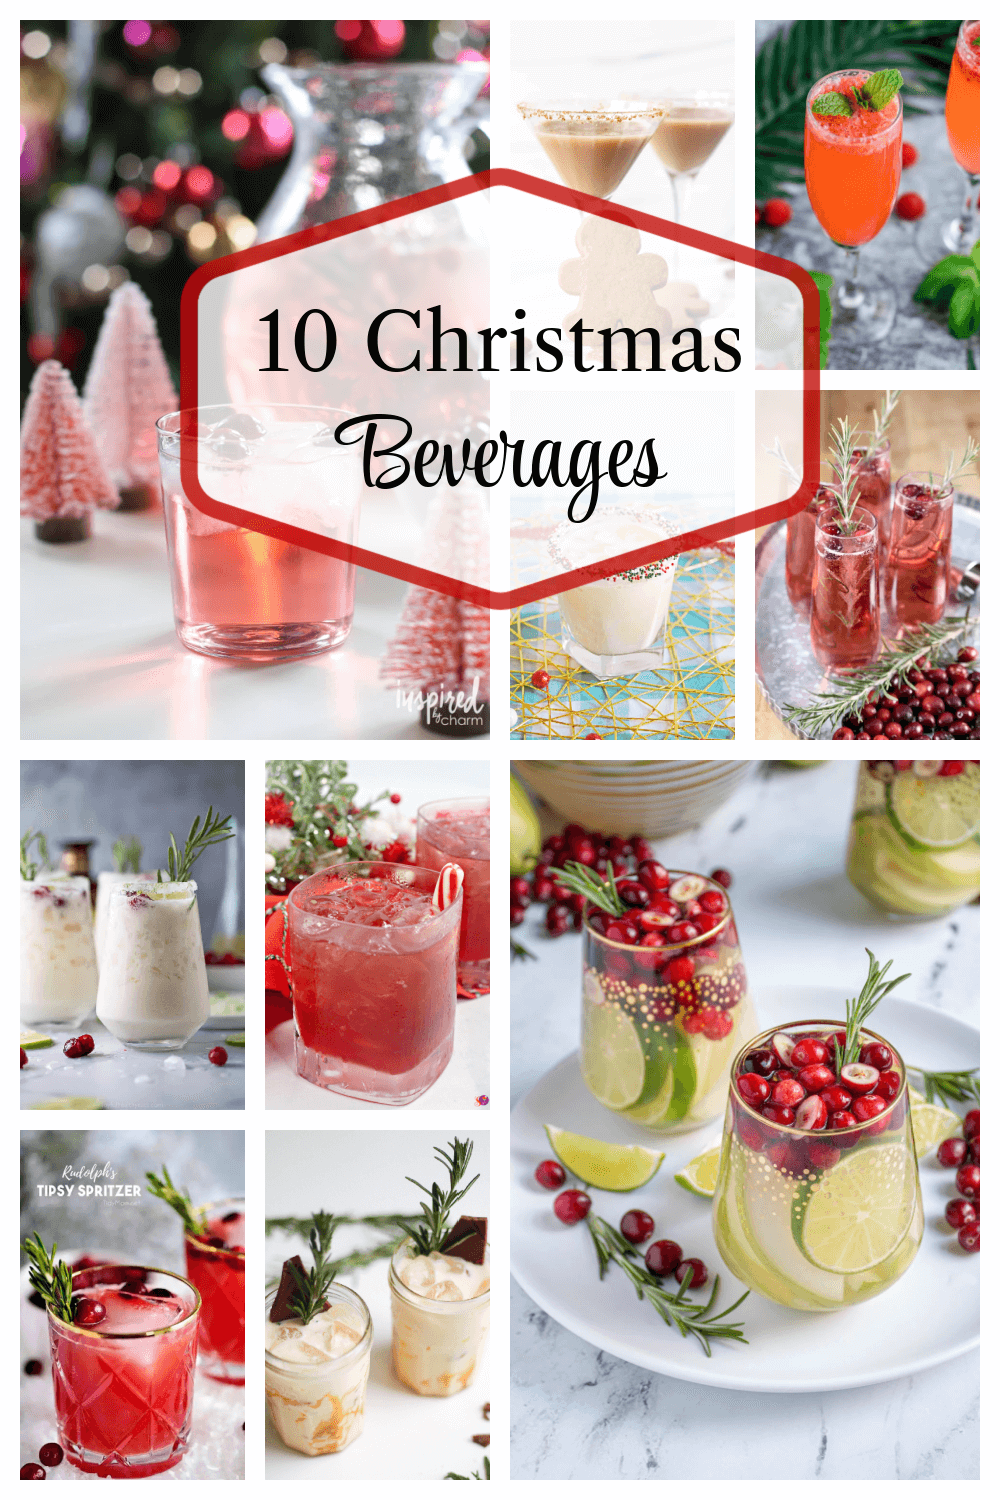 In 10 Christmas Beverages,